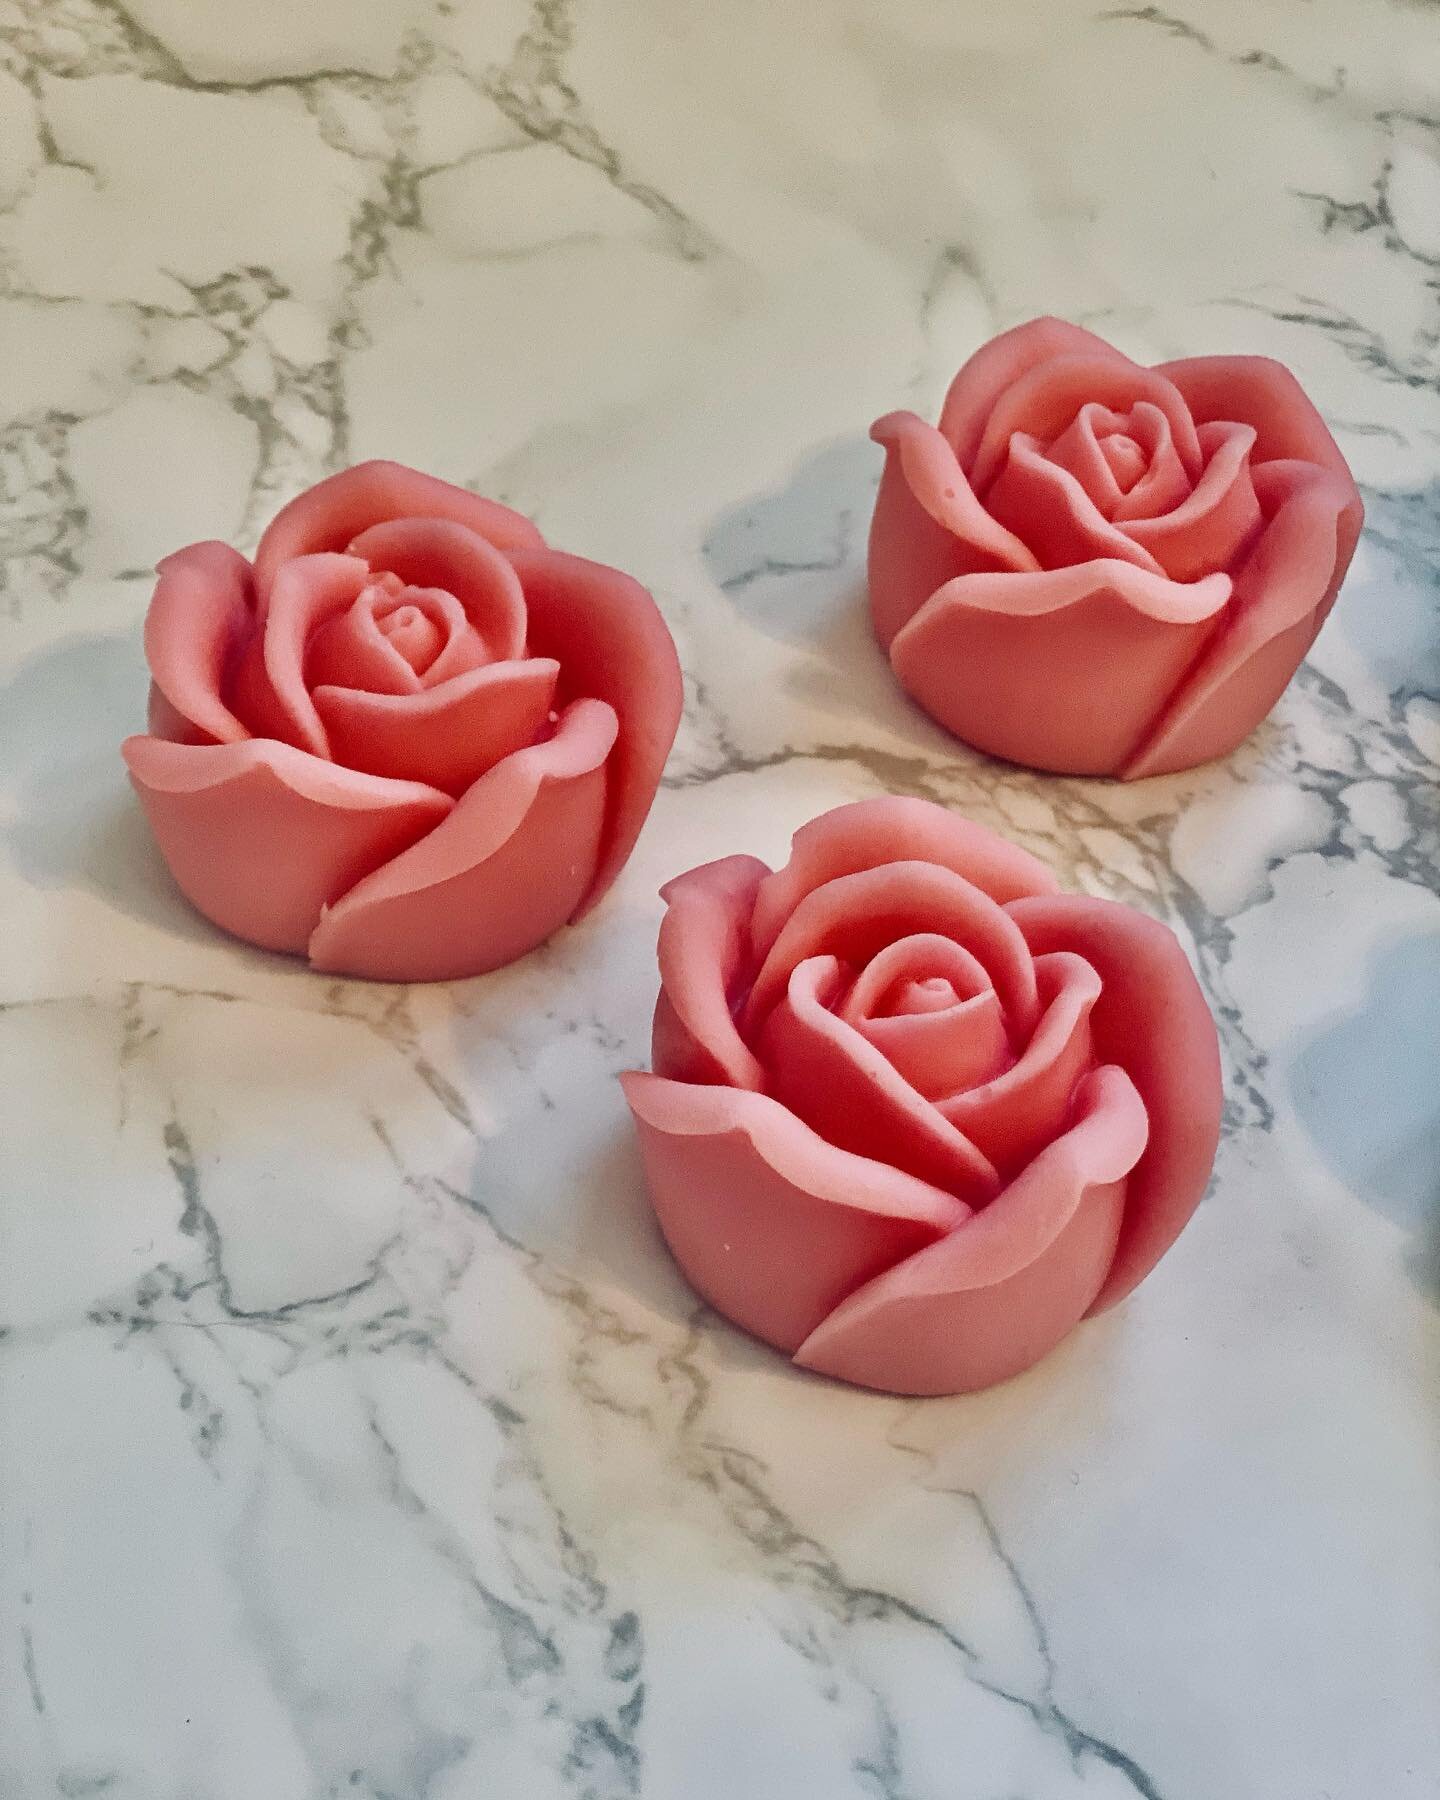 Who said roses are only red 💖

Blush Roses are limited and just the cutest little gift for teachers and coworkers 💝